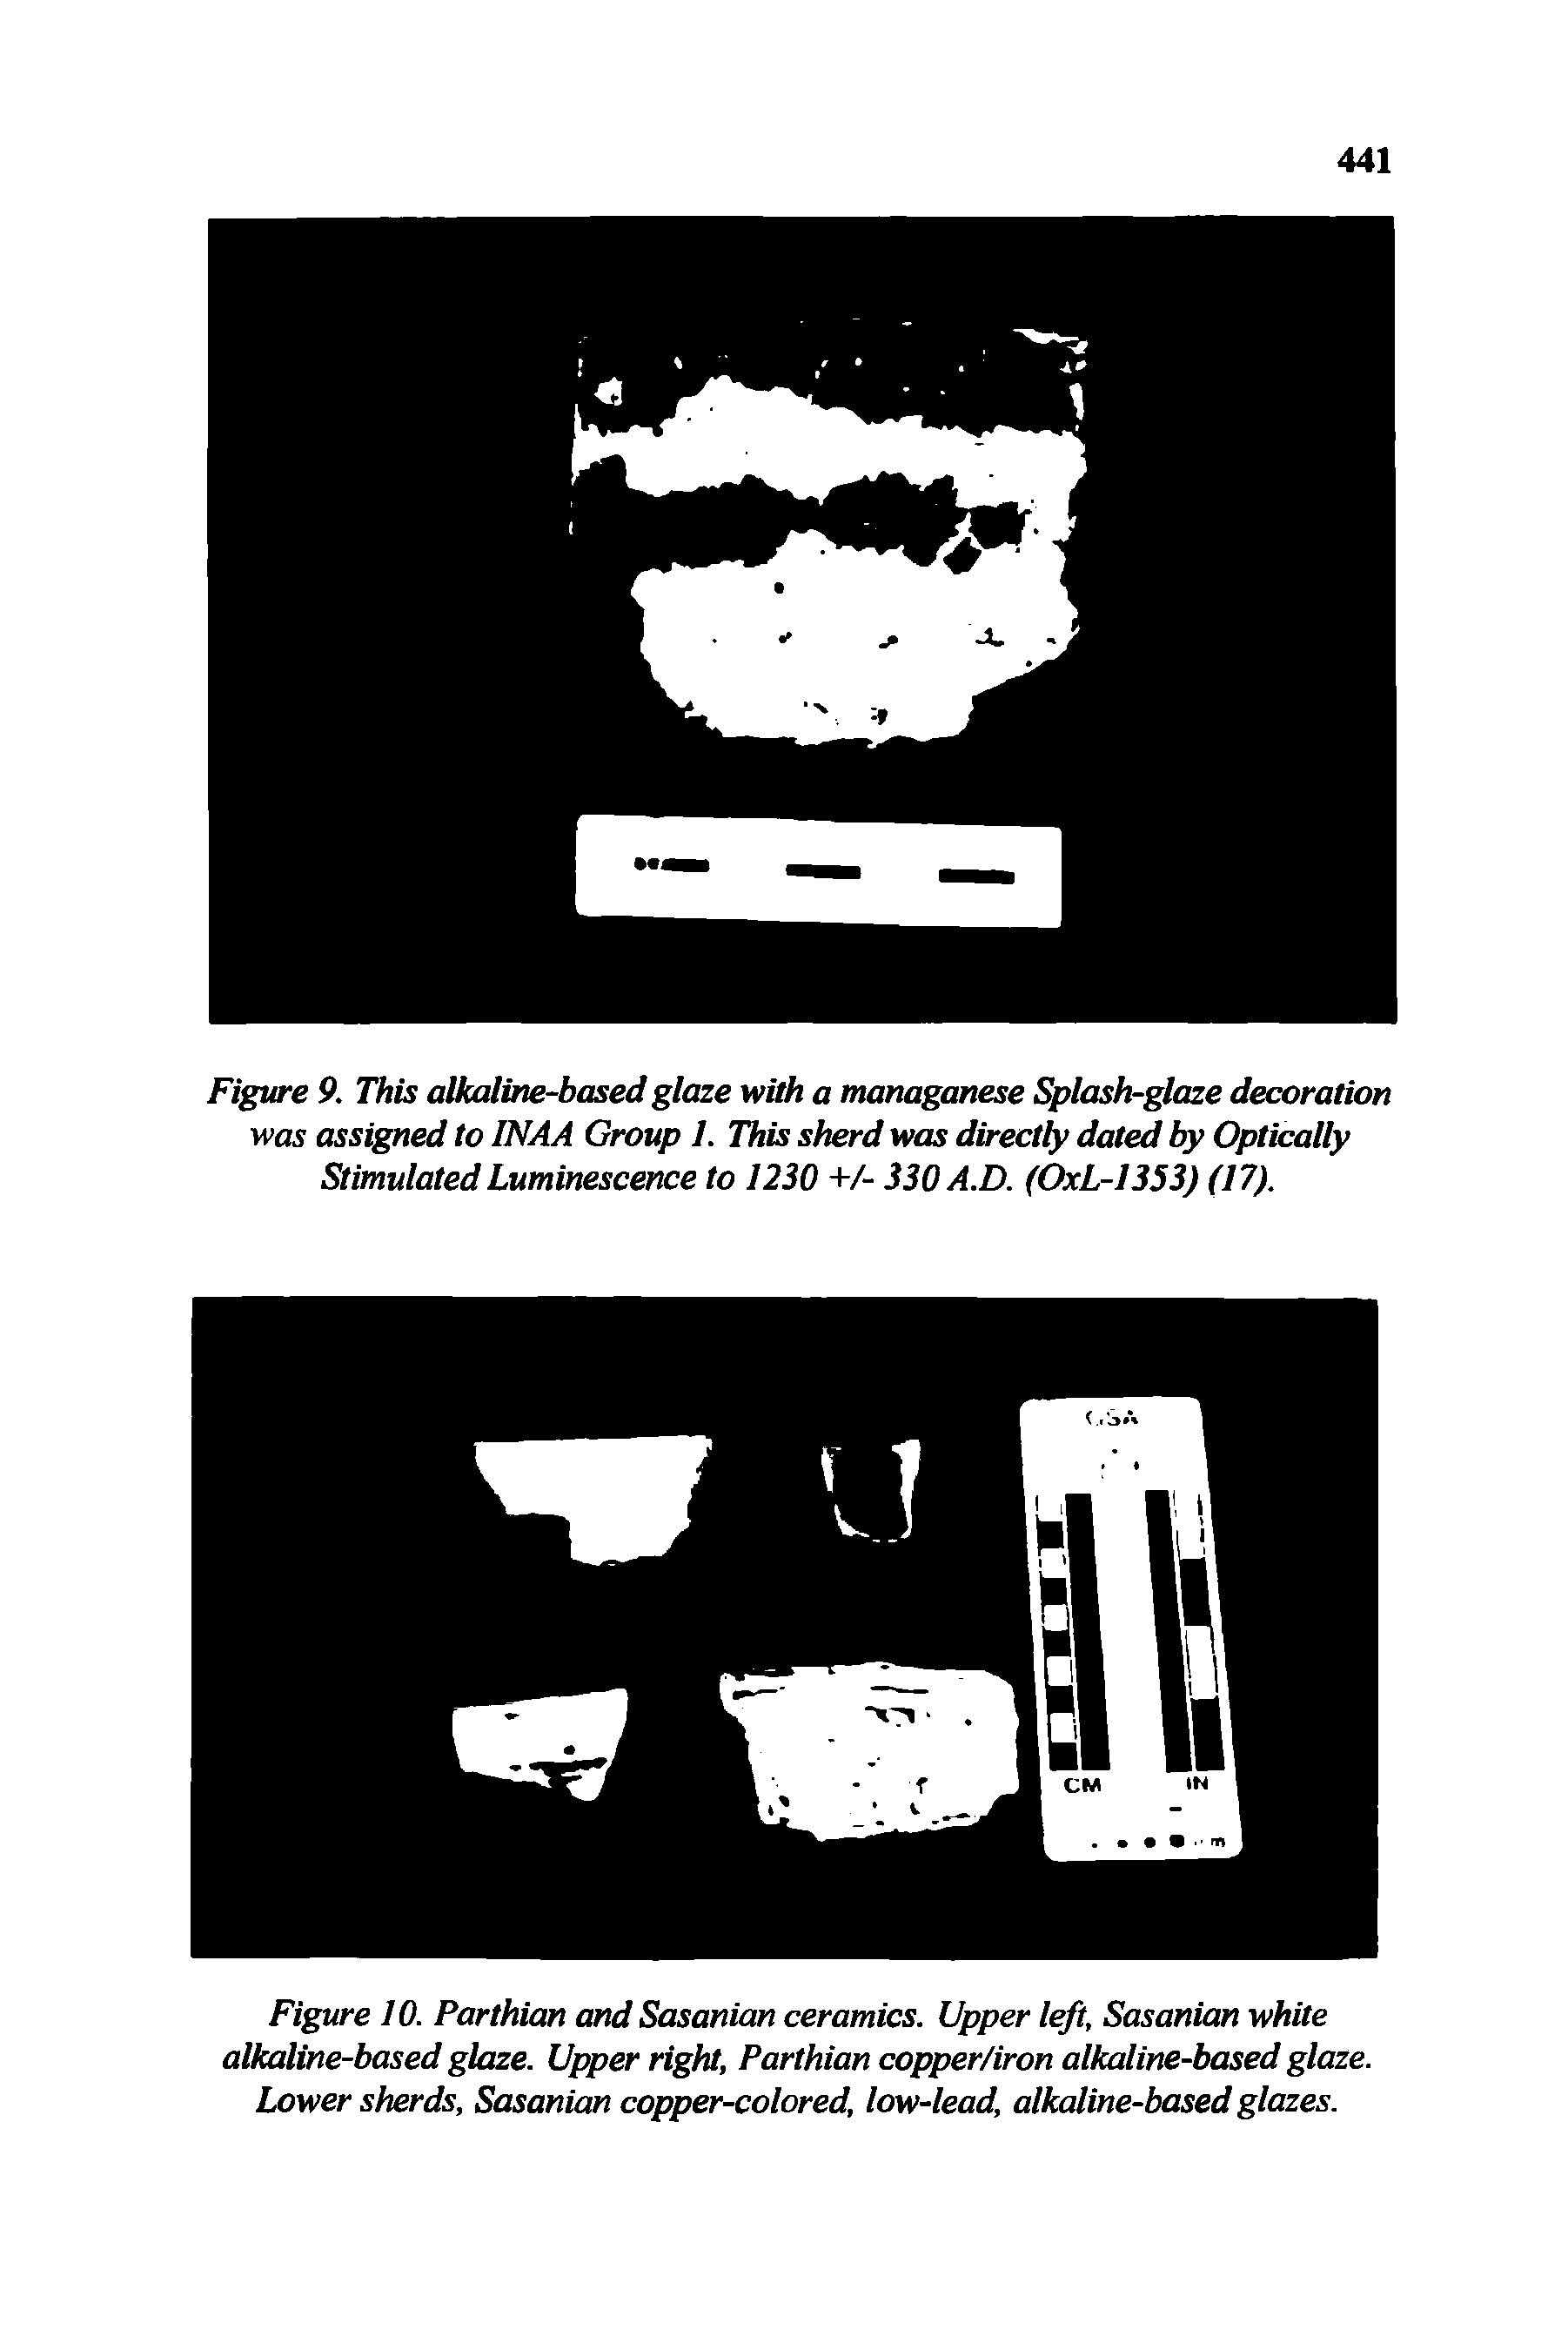 Figure 9. This alkaline-based glaze with a managanese Splash-glaze decoration was assigned to INAA Group 1. This sherd was directly dated by Optically Stimulated Luminescence to 1230 +/- 330A.D. (OxL-1353) (17).